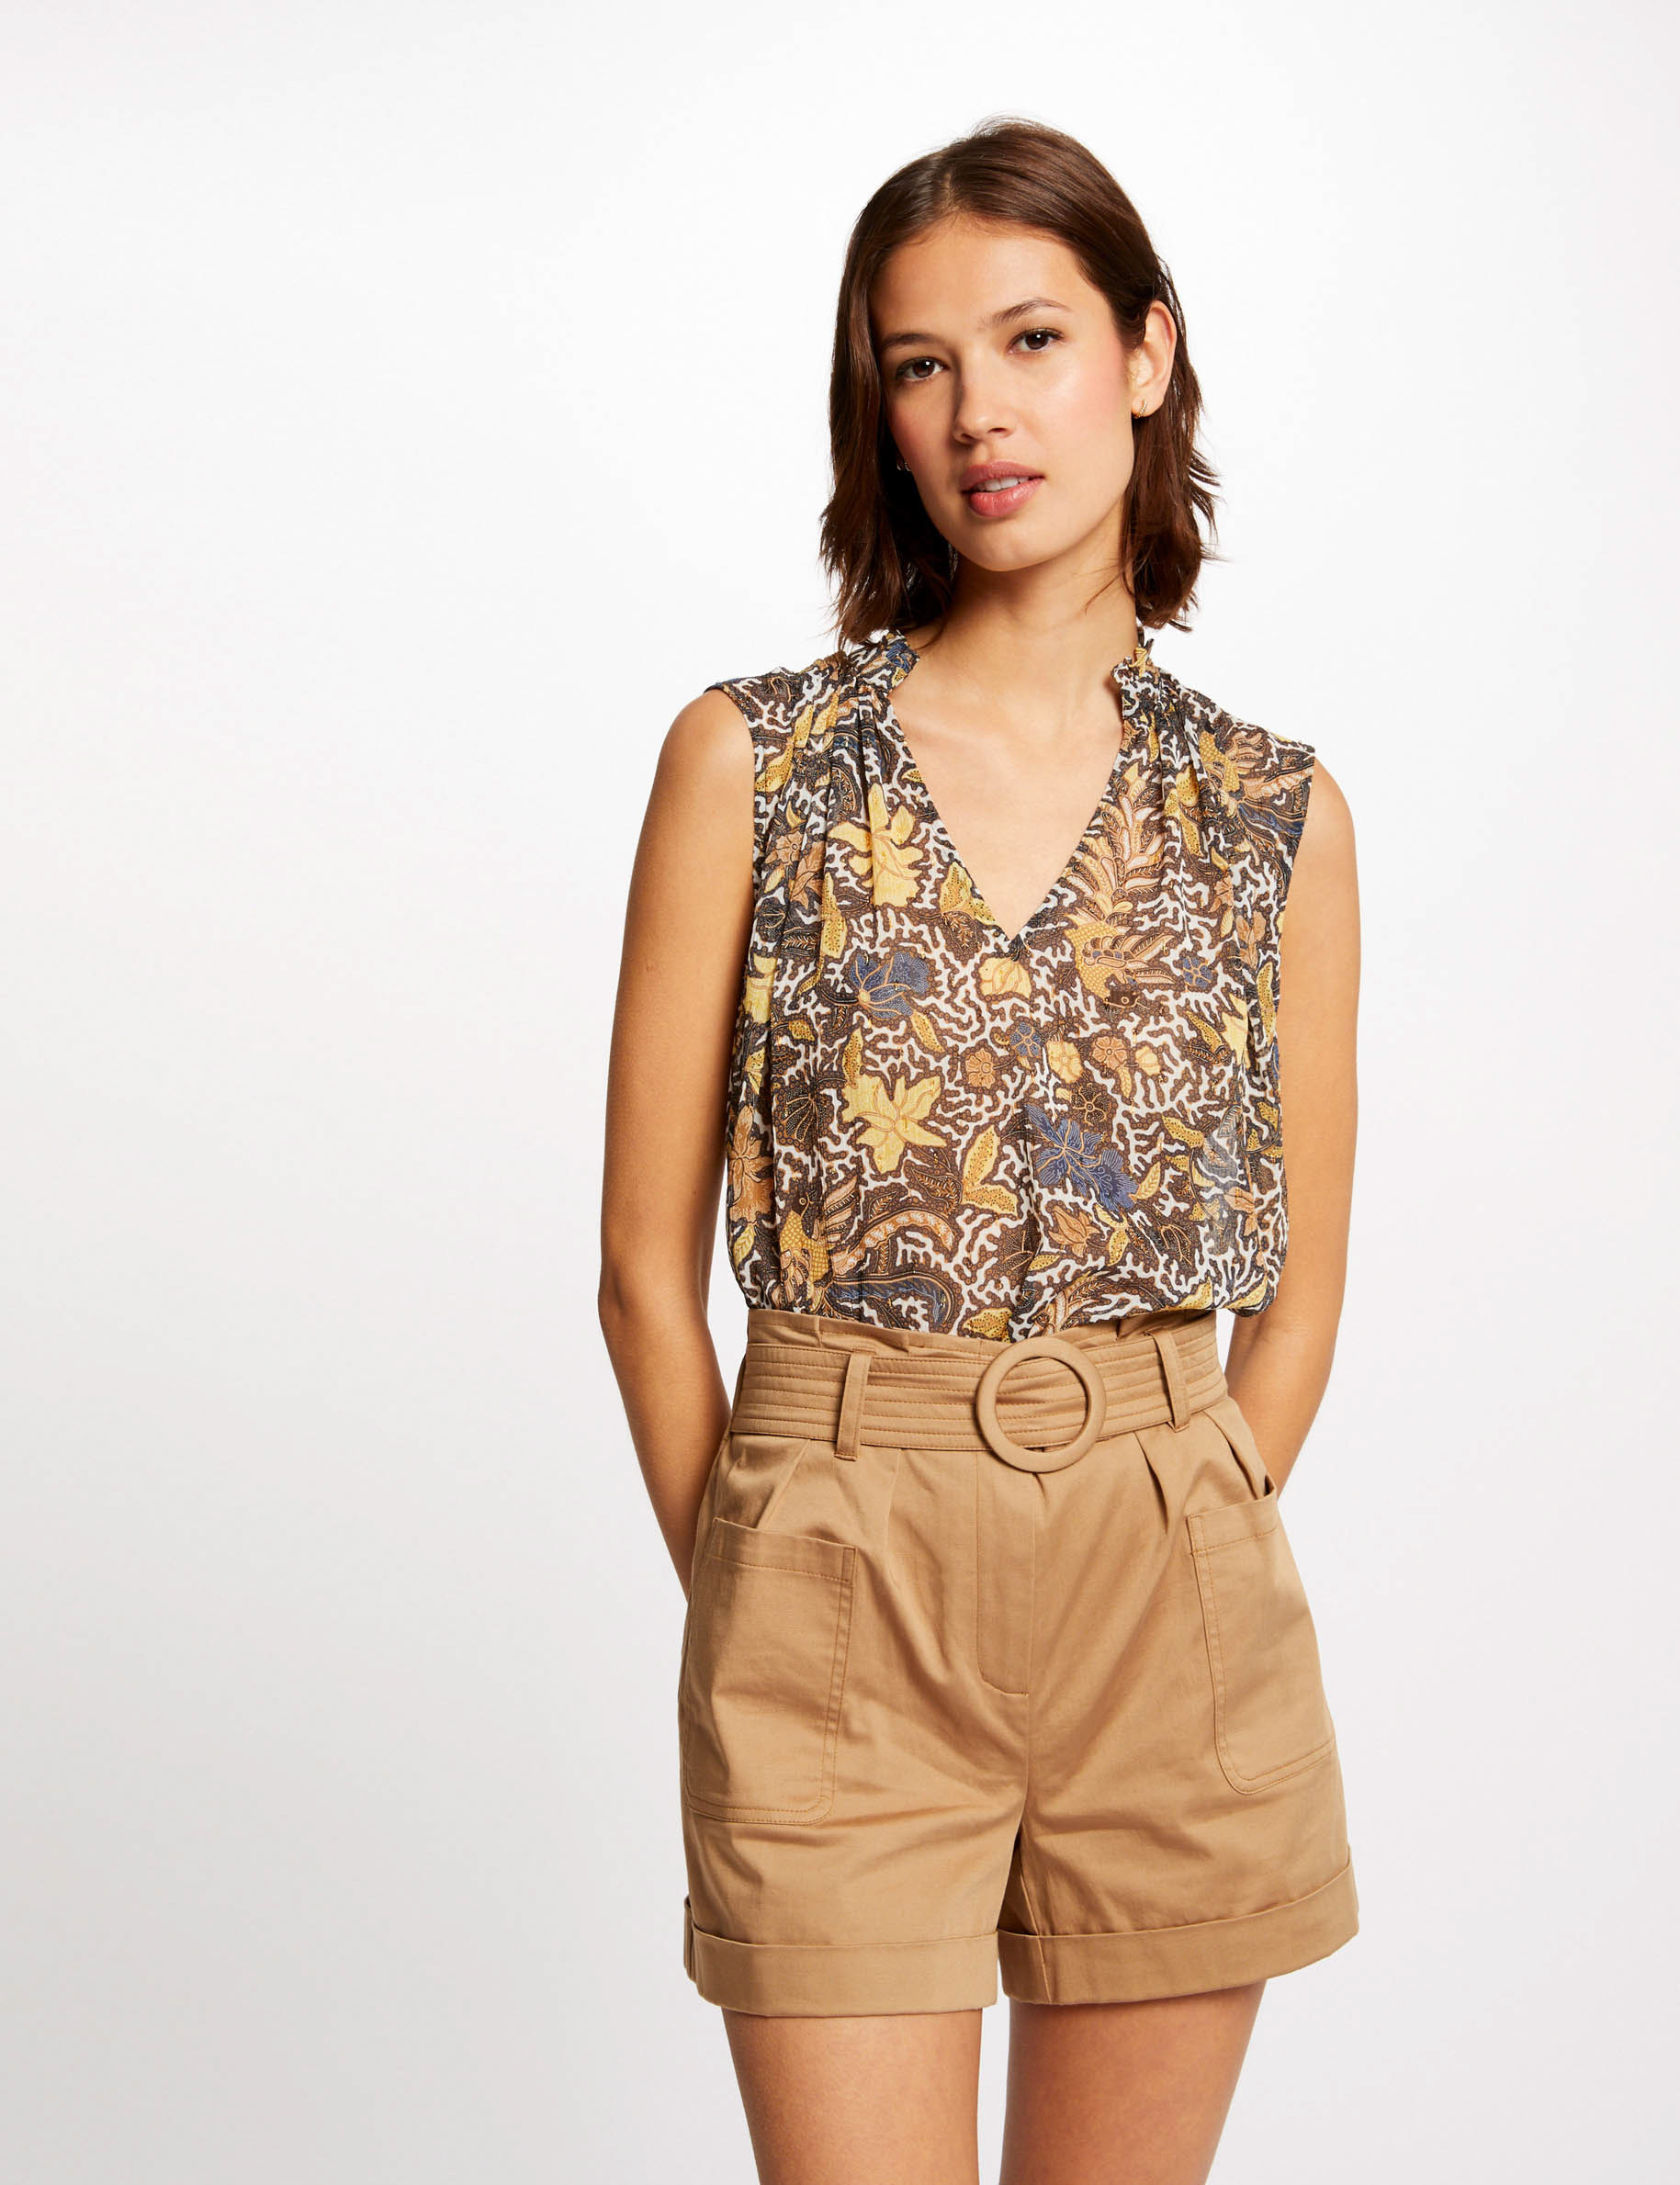 High-waisted straight belted shorts caramel ladies'